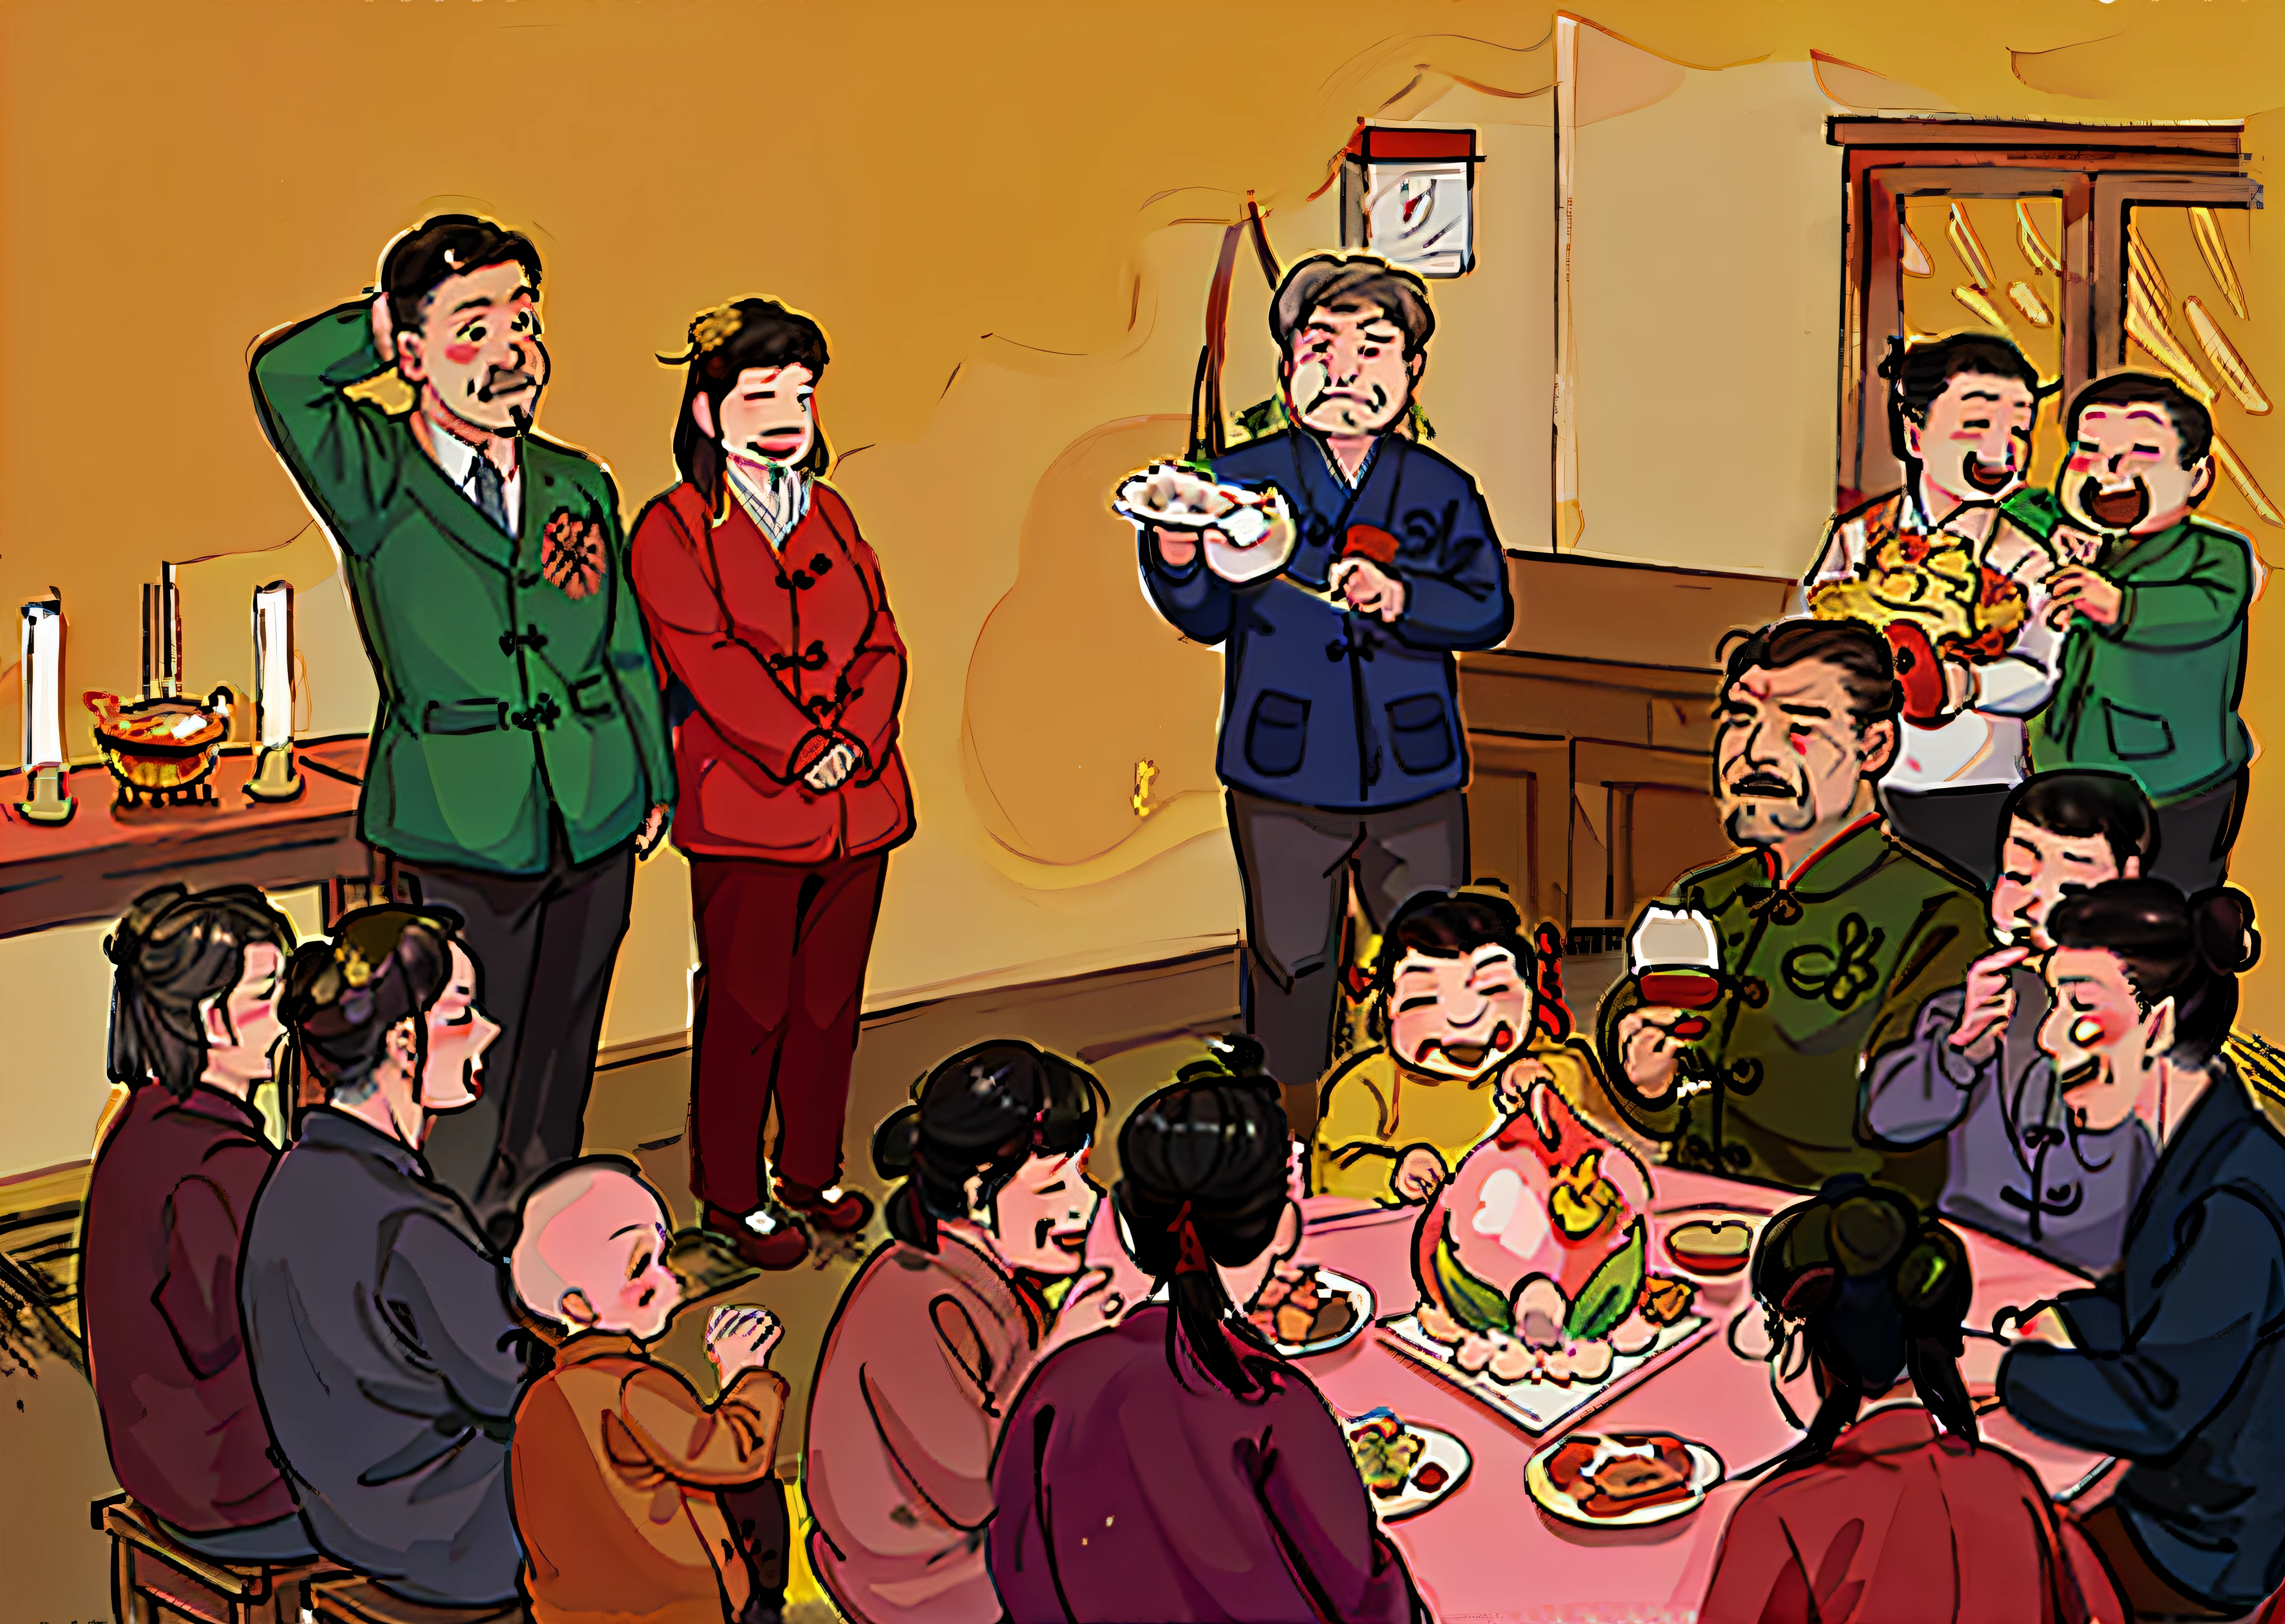 there are many people sitting around a table eating food, gta chinatowon art style, mapo tofu cartoon,  as winnie the pooh, family dinner, gta chinatown wars art style, by Sheng Maoye, by Li Tiefu, by Yi Inmun, gta chinatown art style, family, humorous illustration, inspired by Chen Daofu